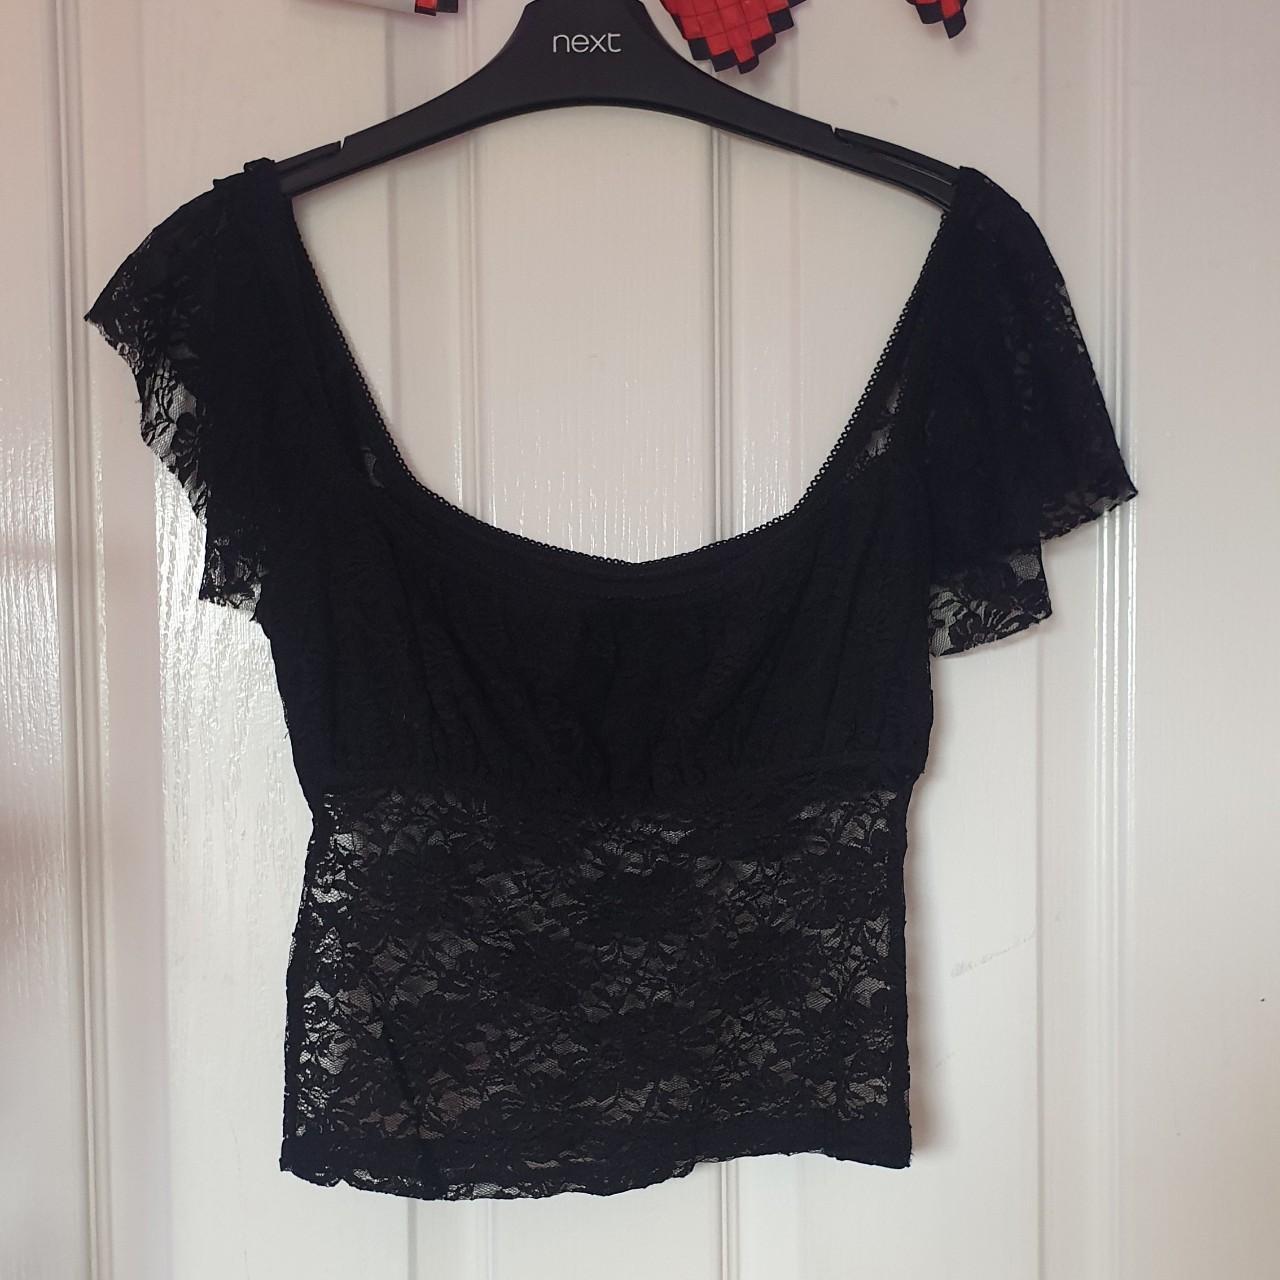 black lace cropped party top with puff sleeves fits... - Depop